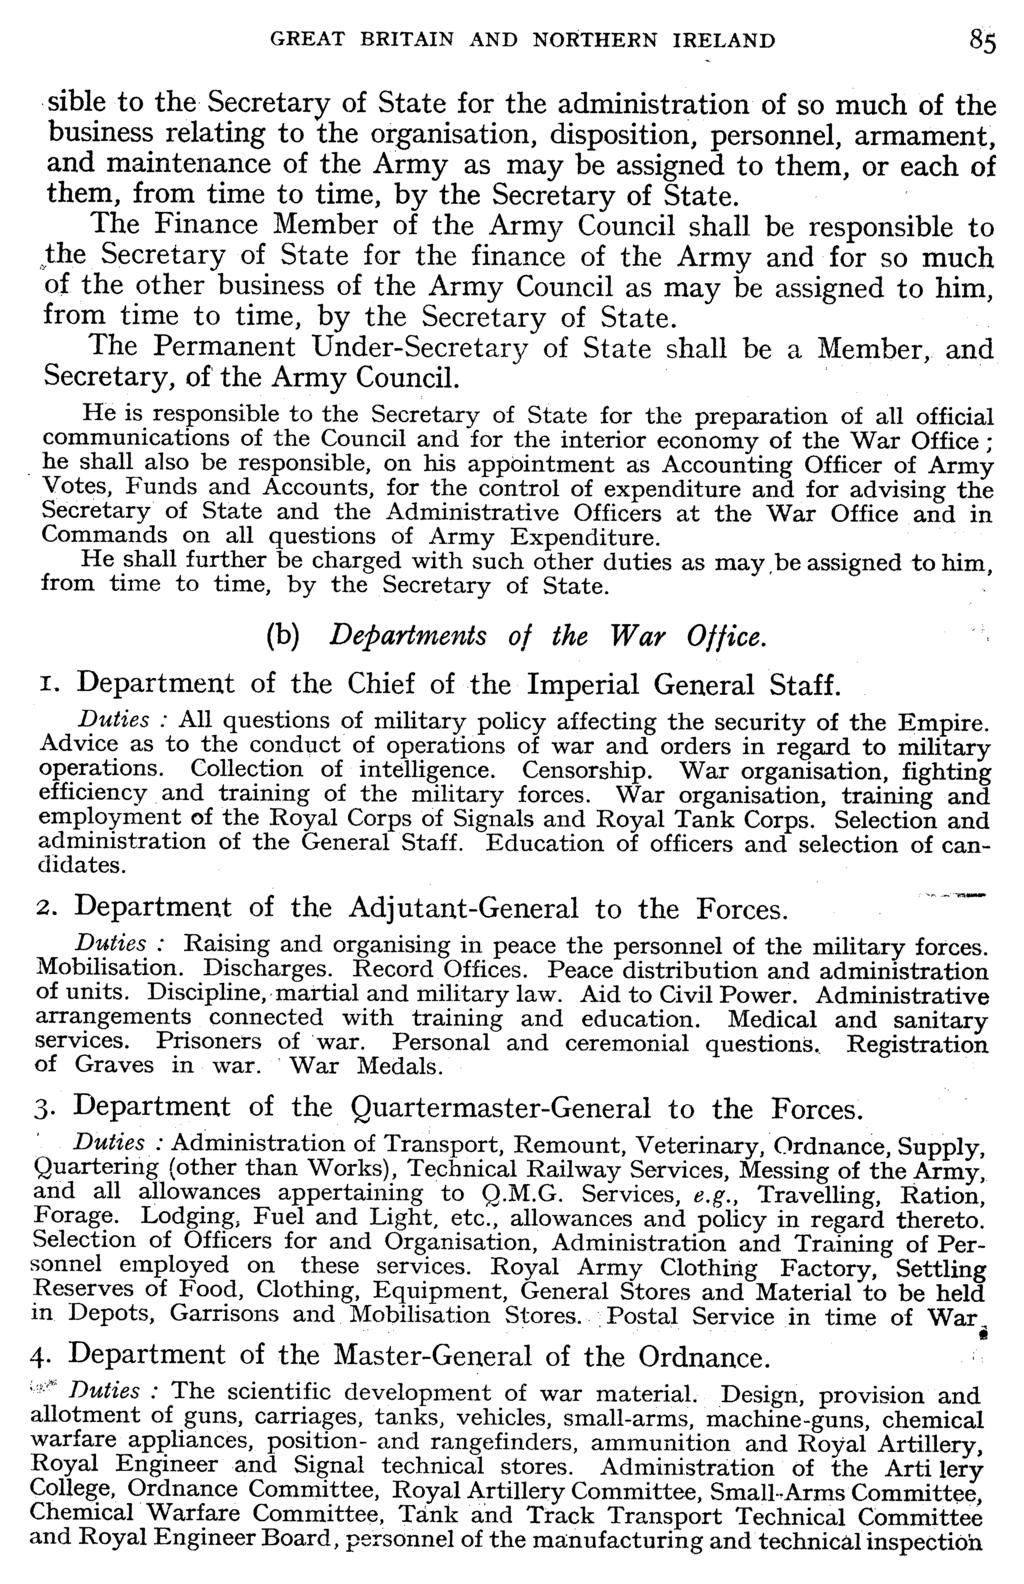 GREAT BRITAIN AND NORTHERN IRELAND 85 sible to the Secretary of State for the administration of so much of the business relating to the organisation, disposition, personnel, armament, and maintenance